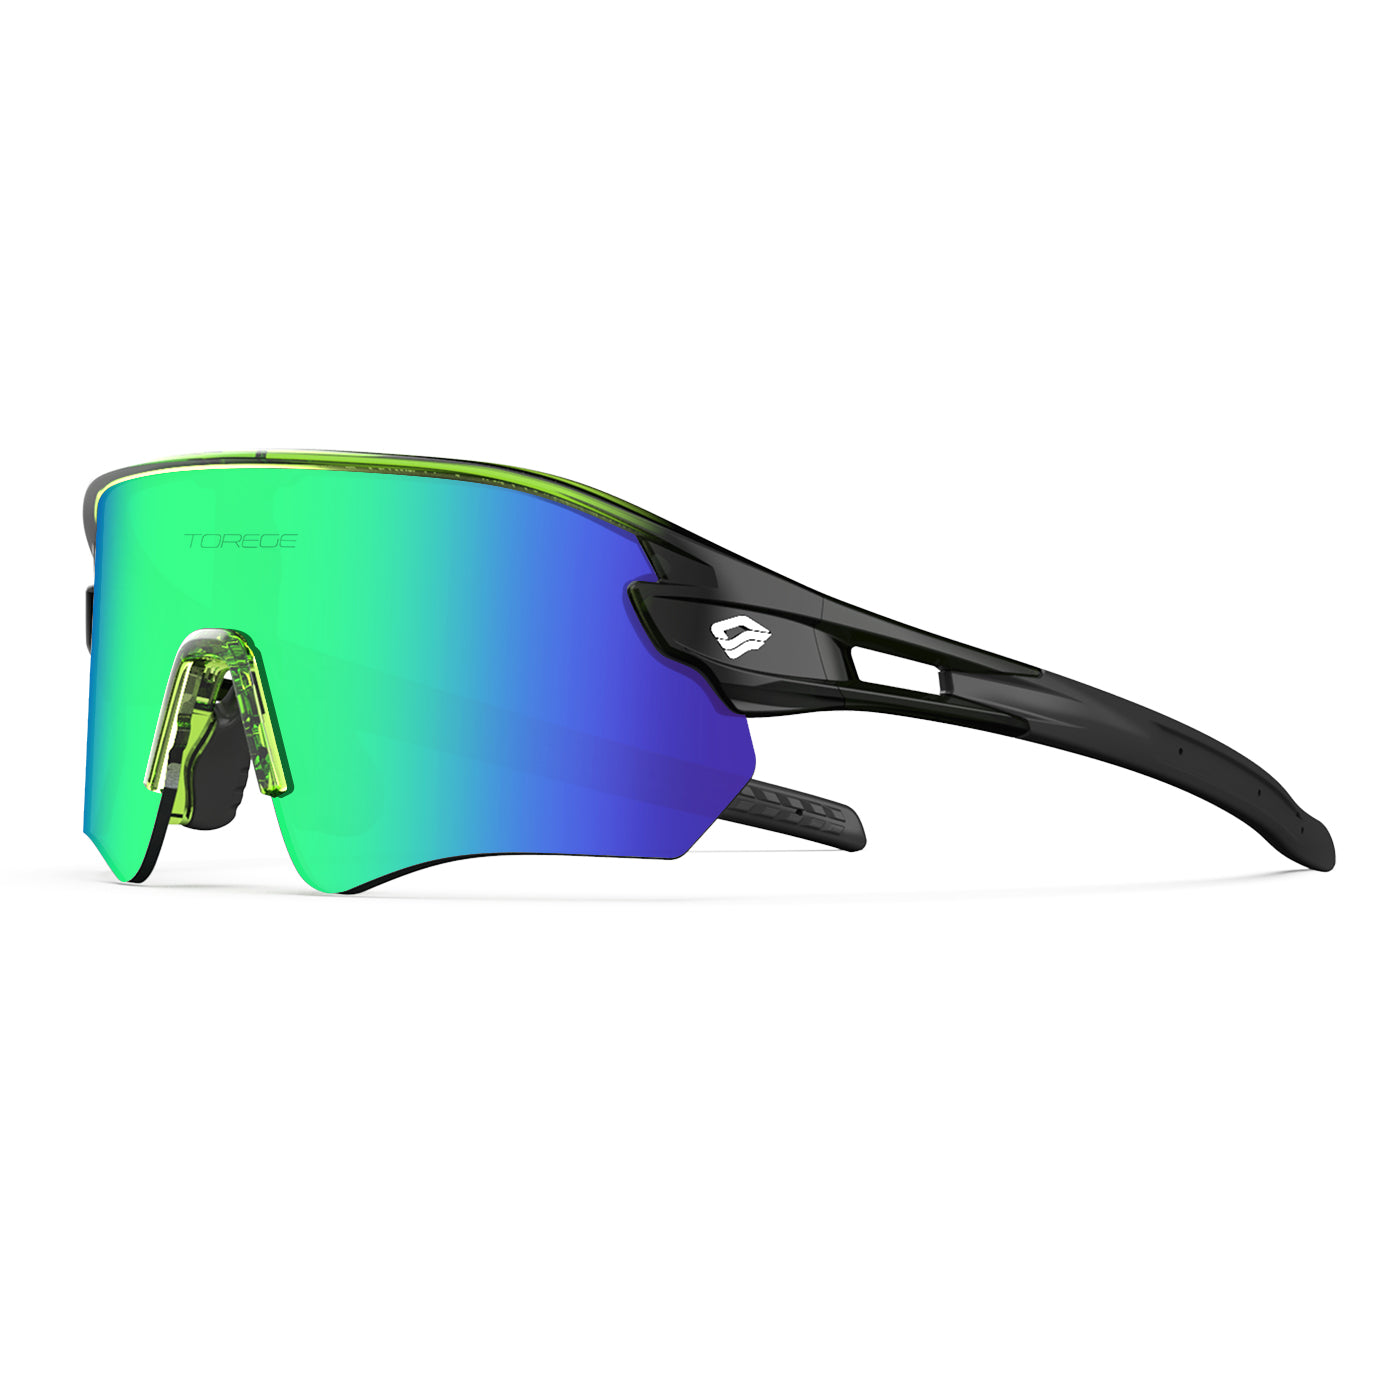 Emerald Glow Ultra Lightweight Sports Sunglasses for Men & Women with Lifetime Warranty - Ideal for Cycling, Hiking, Fishing, Golf & Running - Black